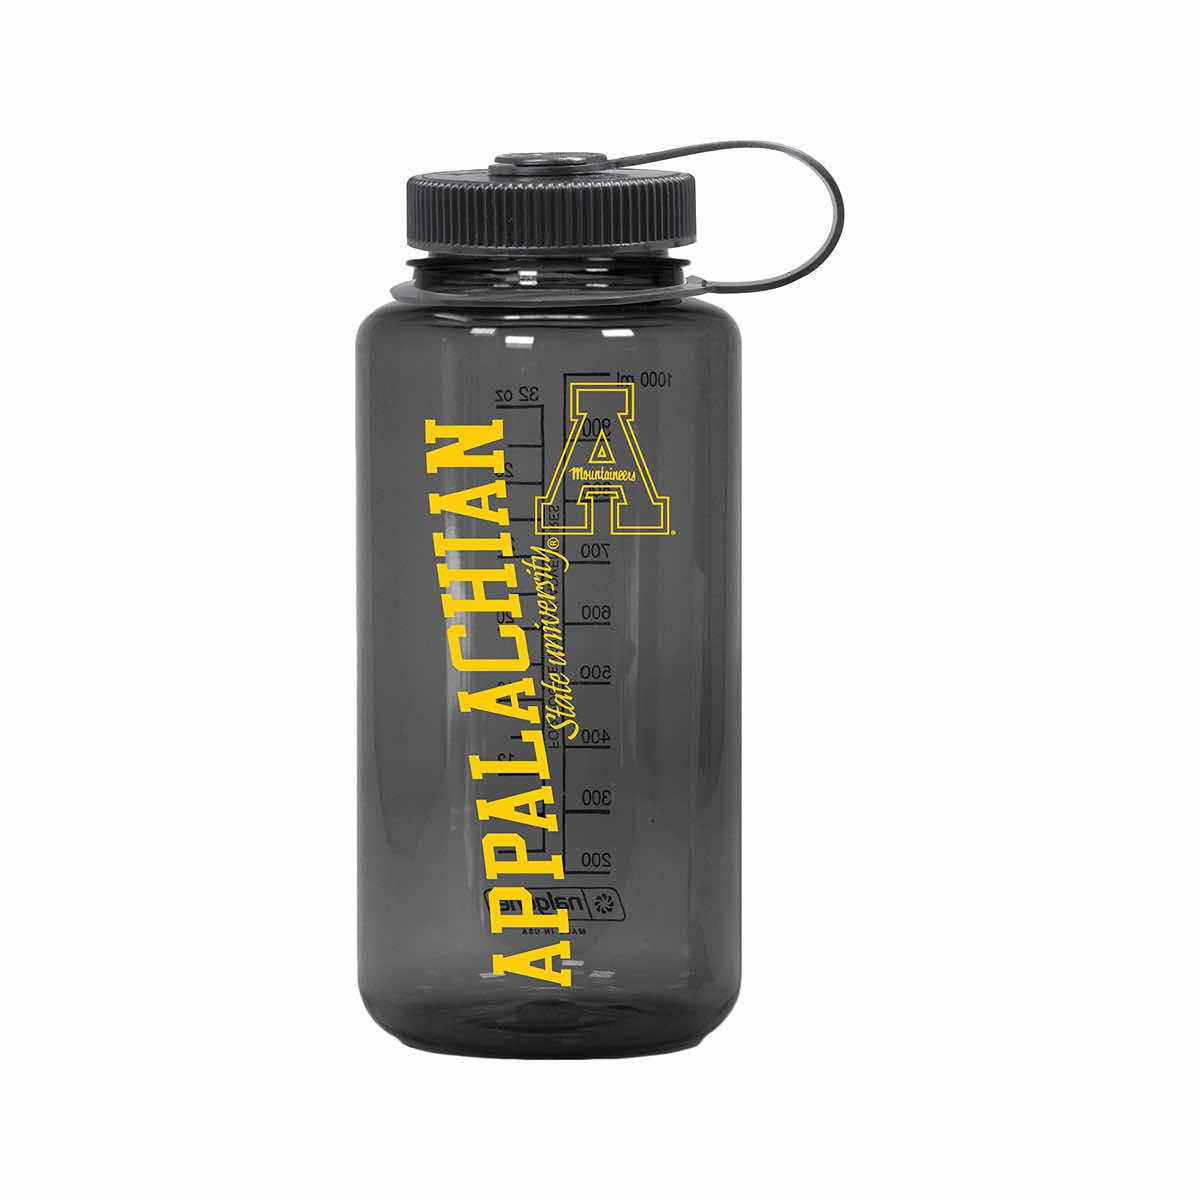 Iron Flask 24 oz Narrow Mouth Water Bottle with Spout Lid Ocean